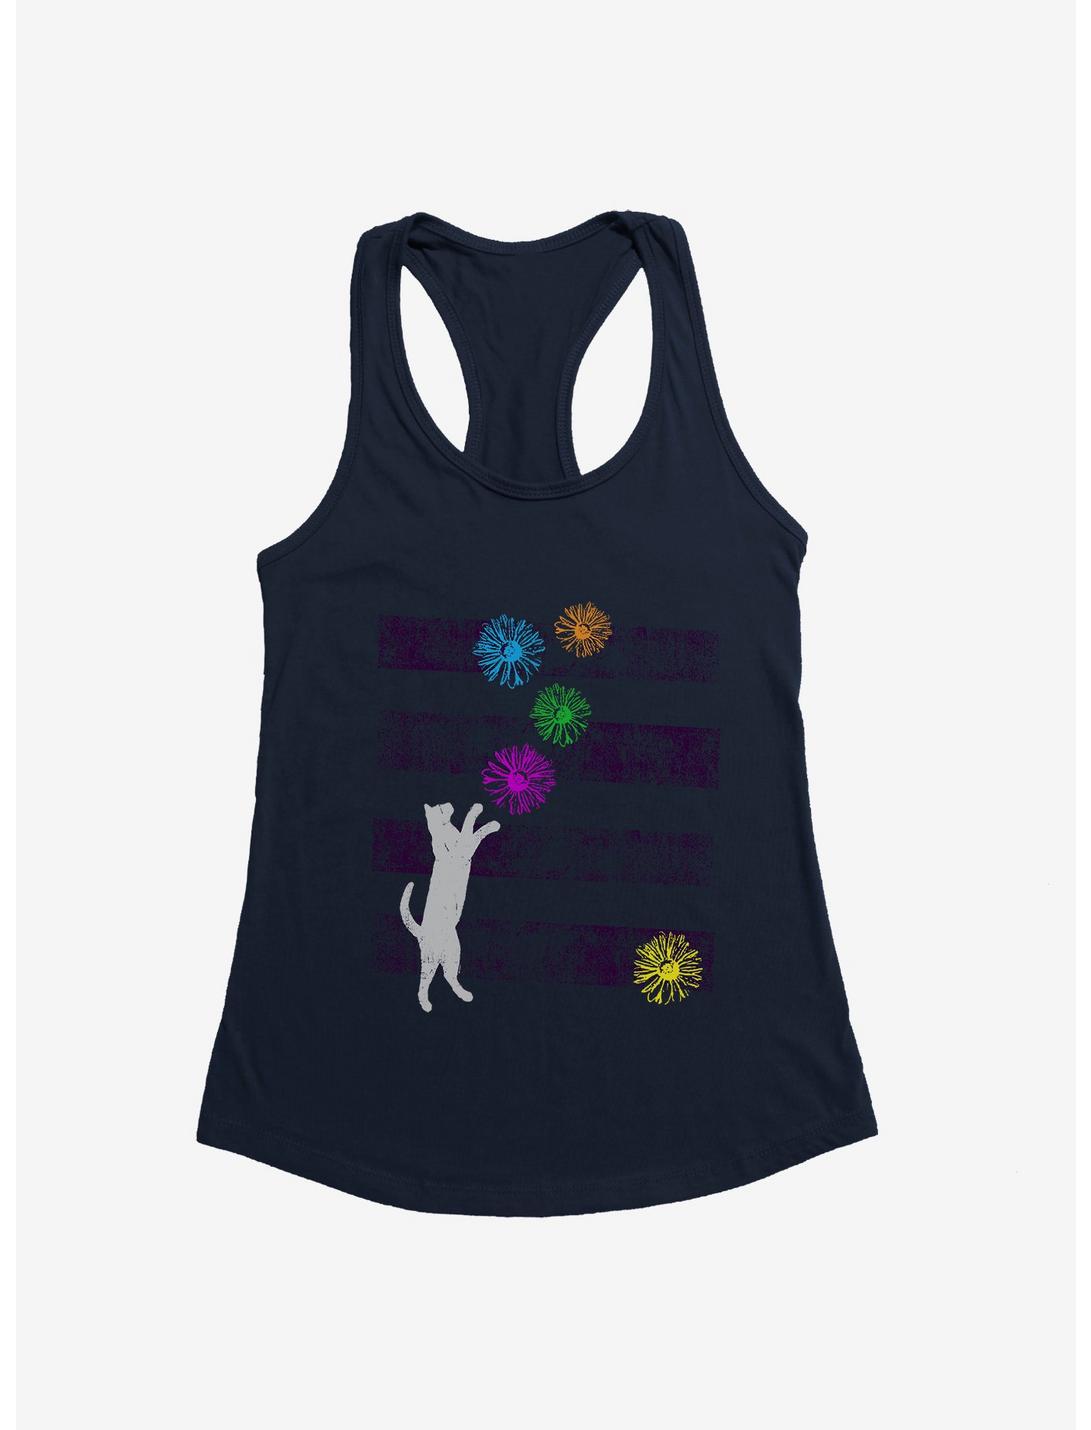 iCreate Cat And Daisies Girls Tank, , hi-res